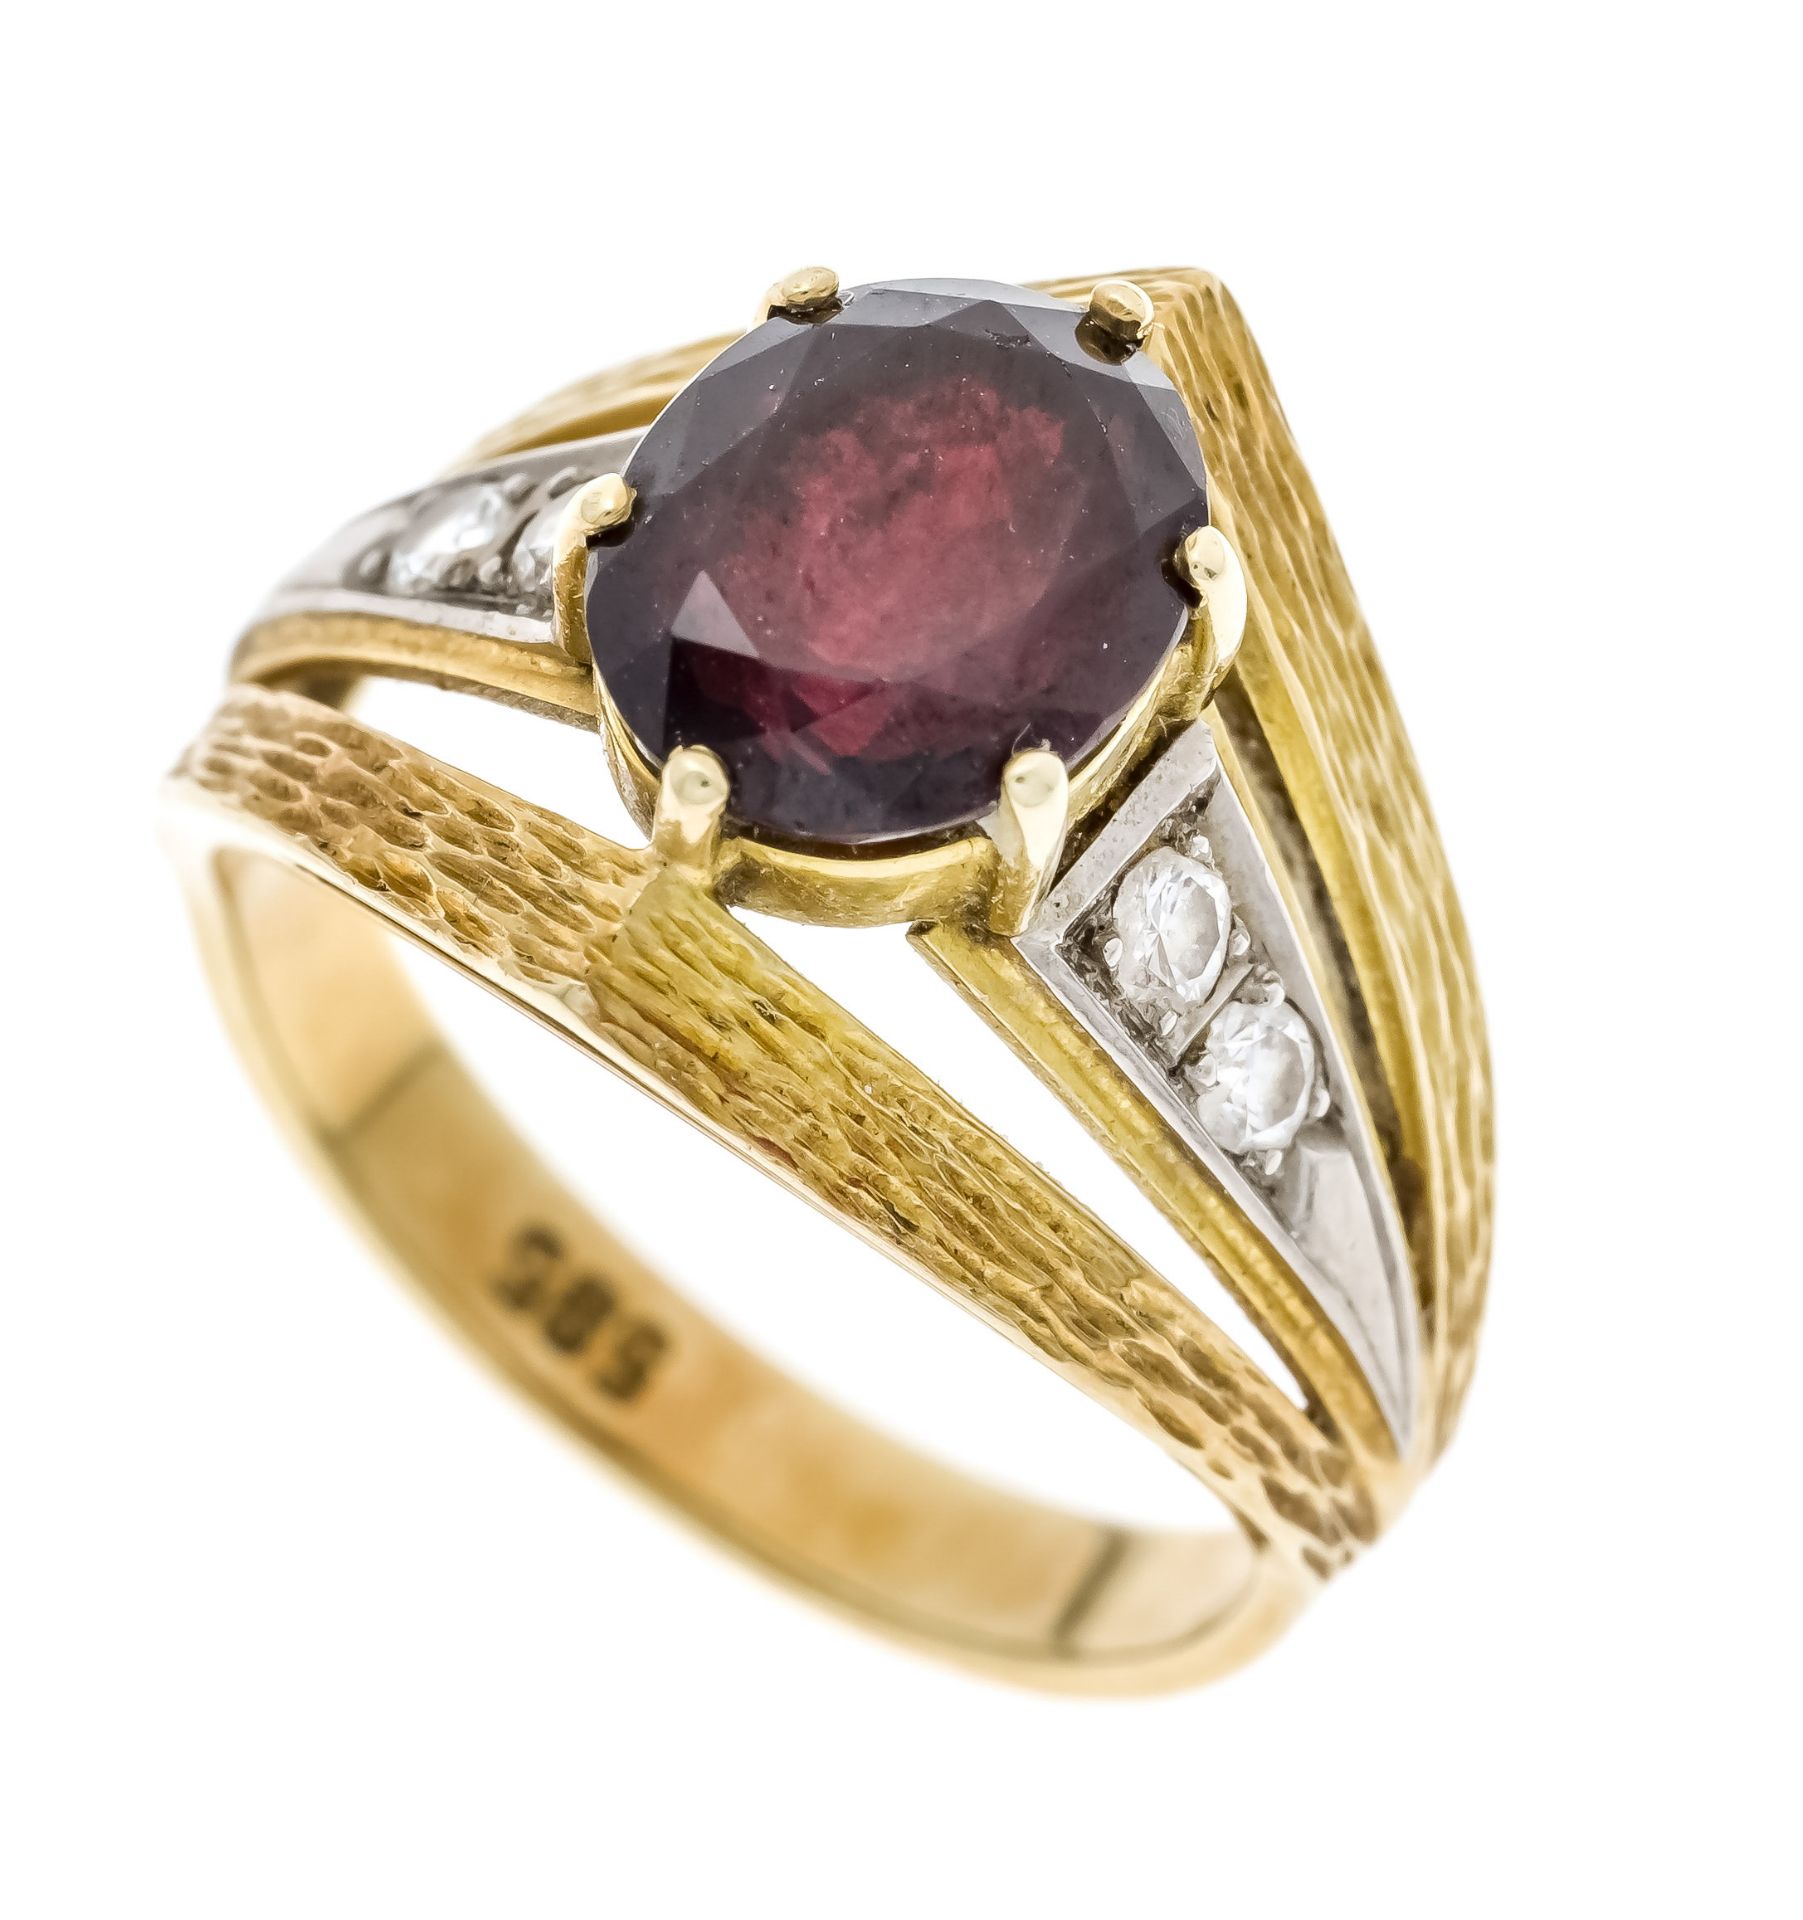 Garnet-brilliant ring GG/WG 585/000 with an oval faceted garnet 9 x 7 mm and 4 brilliant-cut